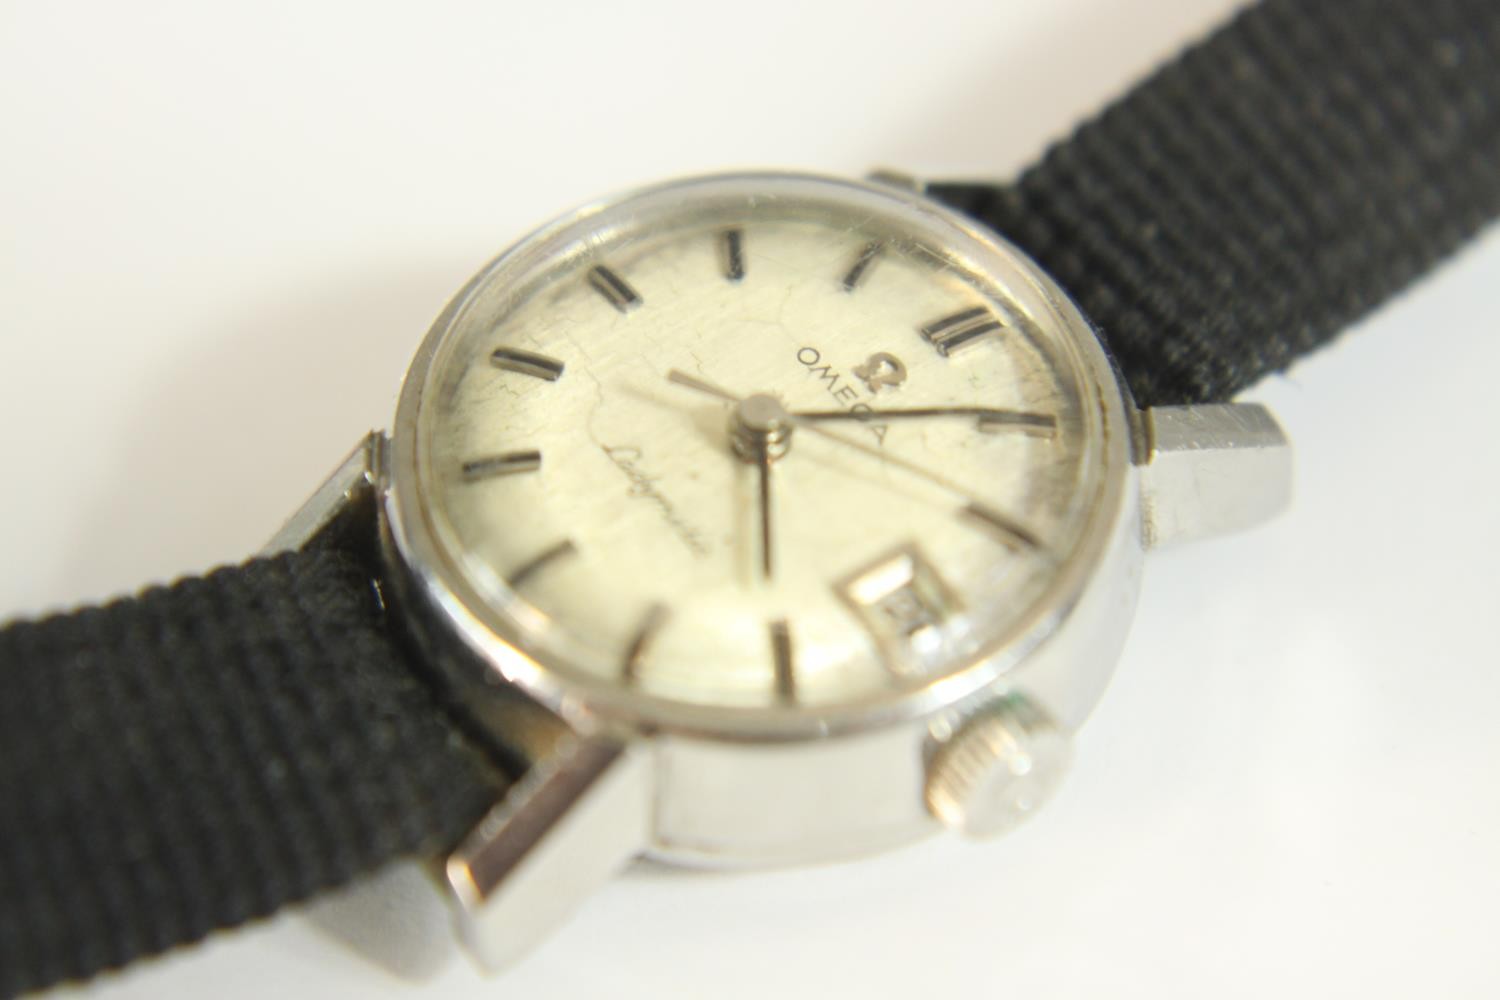 A vintage ladies Omega Ladymatic wristwatch, with baton numerals, sweeping second hand and date - Image 6 of 8